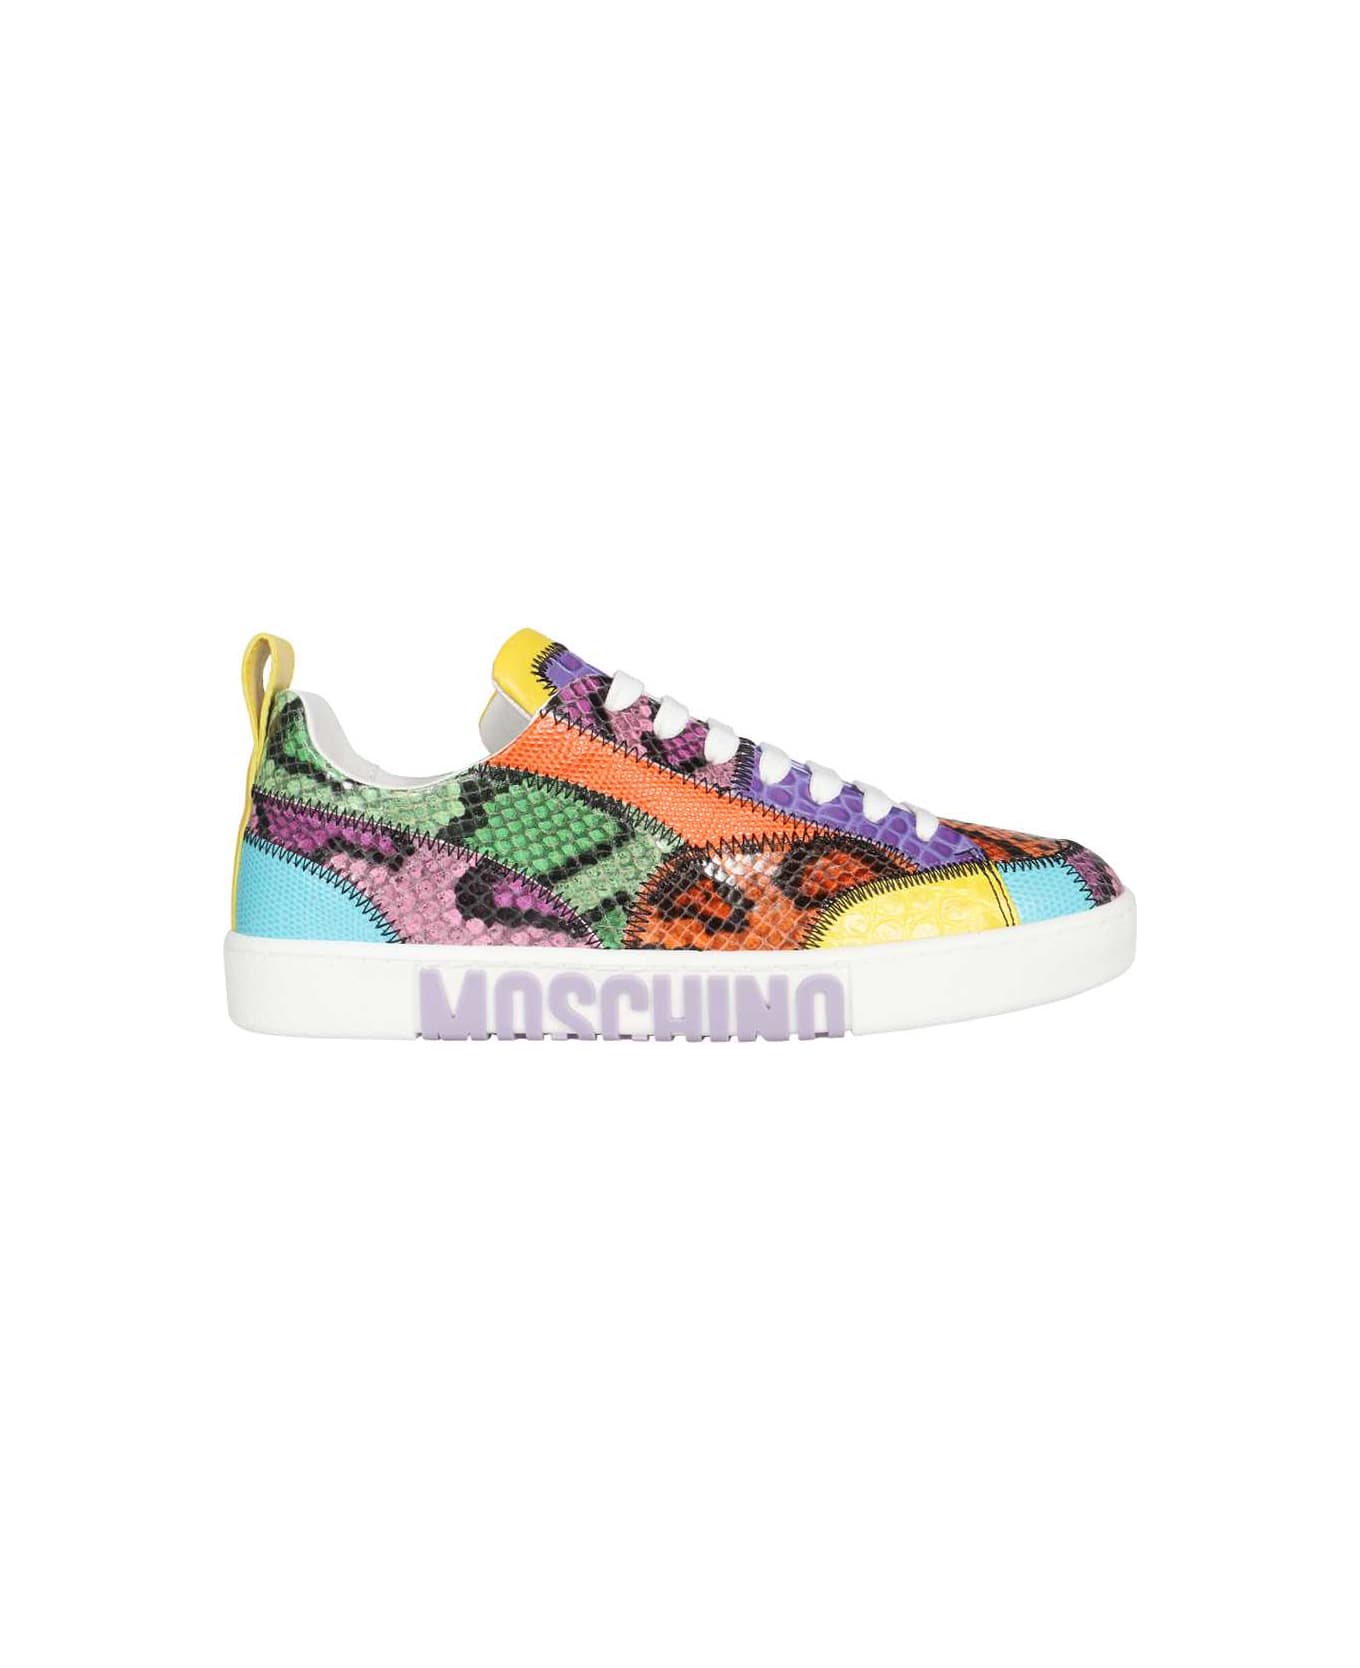 Moschino Low-top Sneakers - Multicolor スニーカー